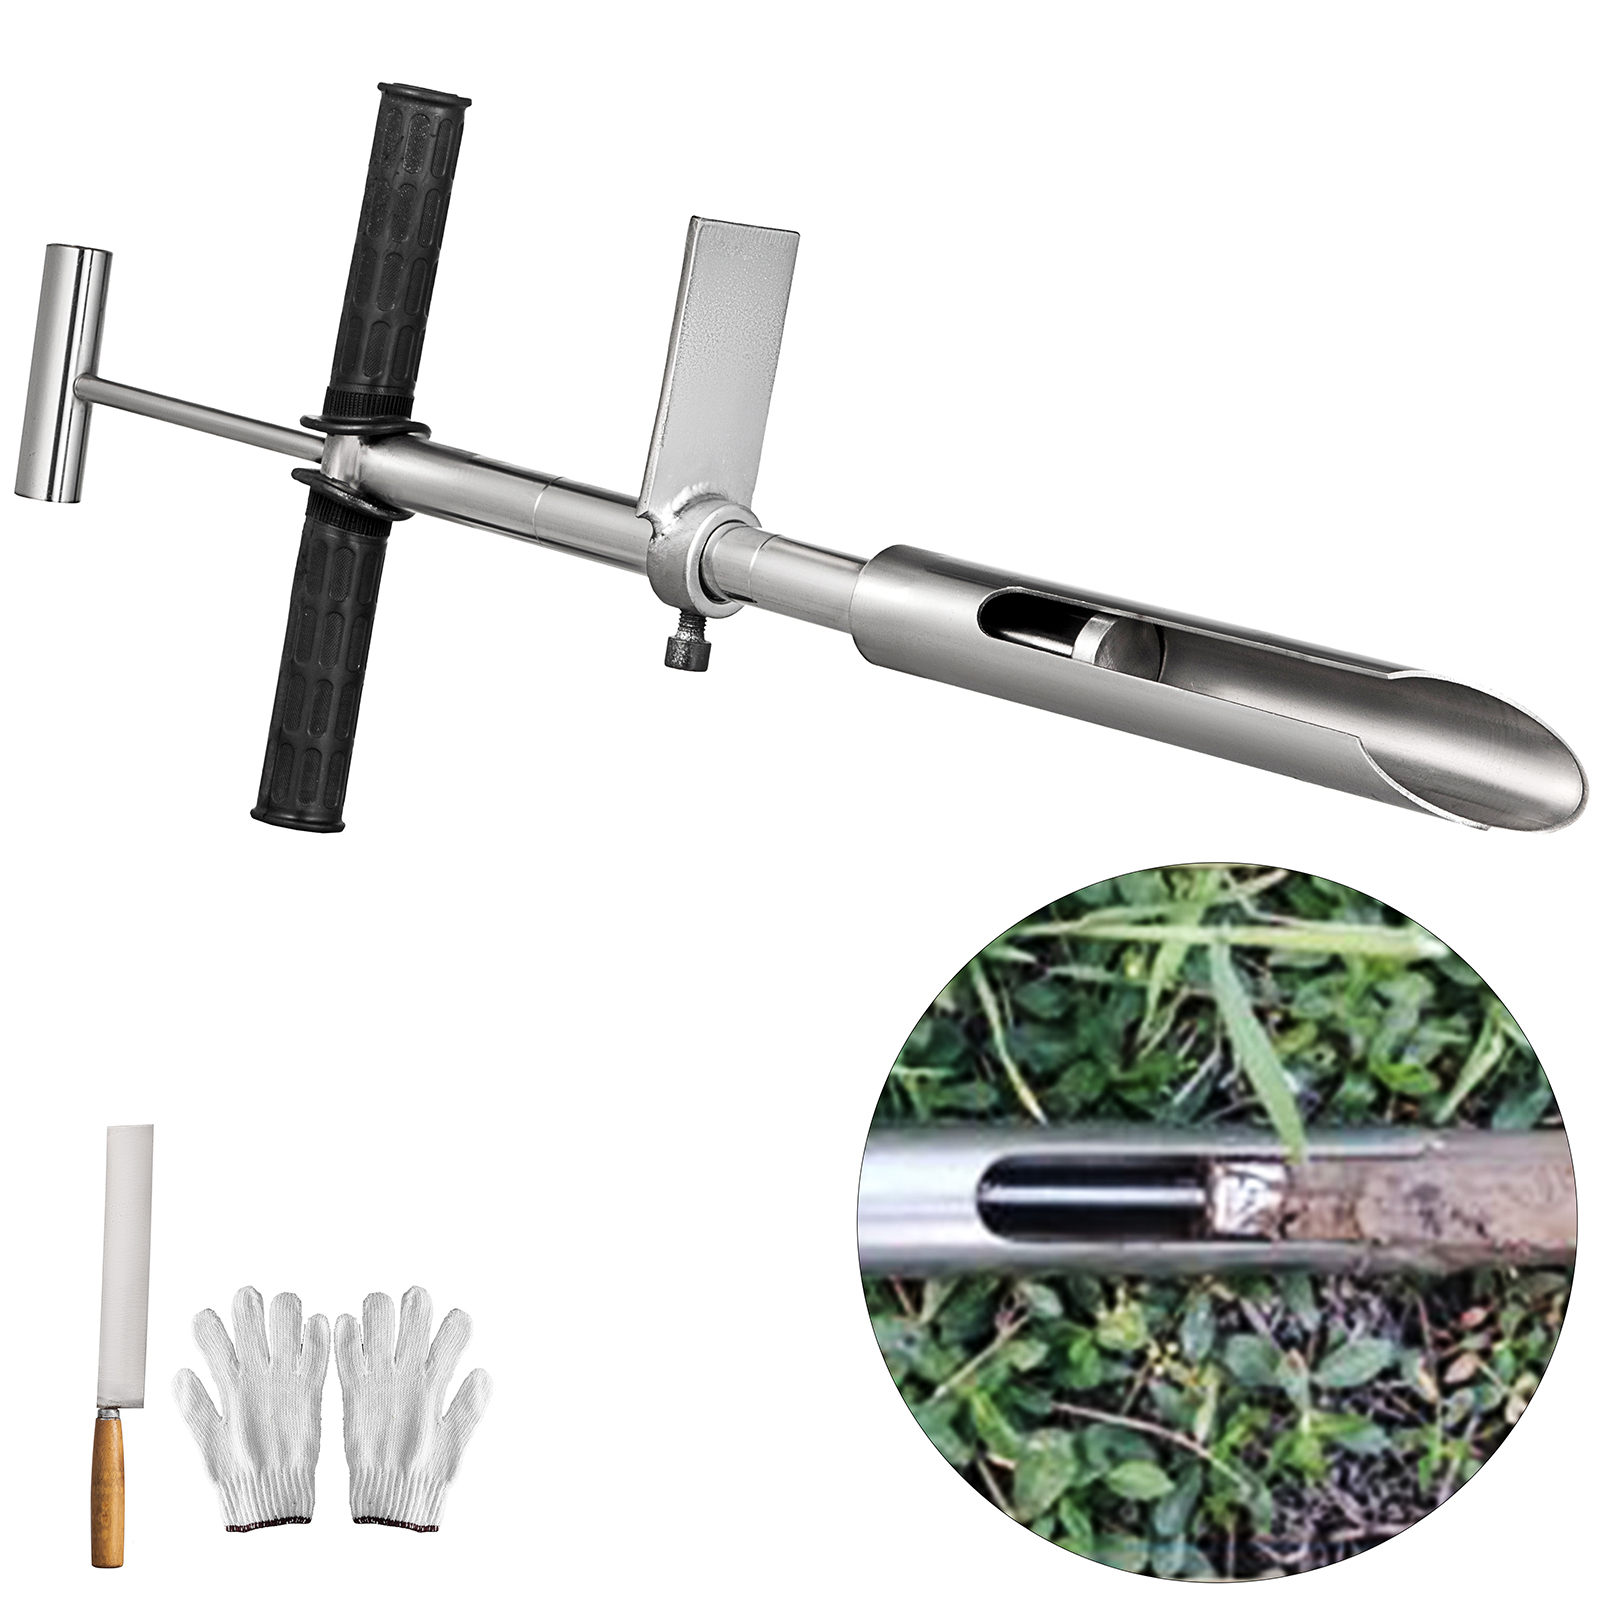 304 Stainless steel soil probe sampler with ejector eject bore foot pedal GOOD x 